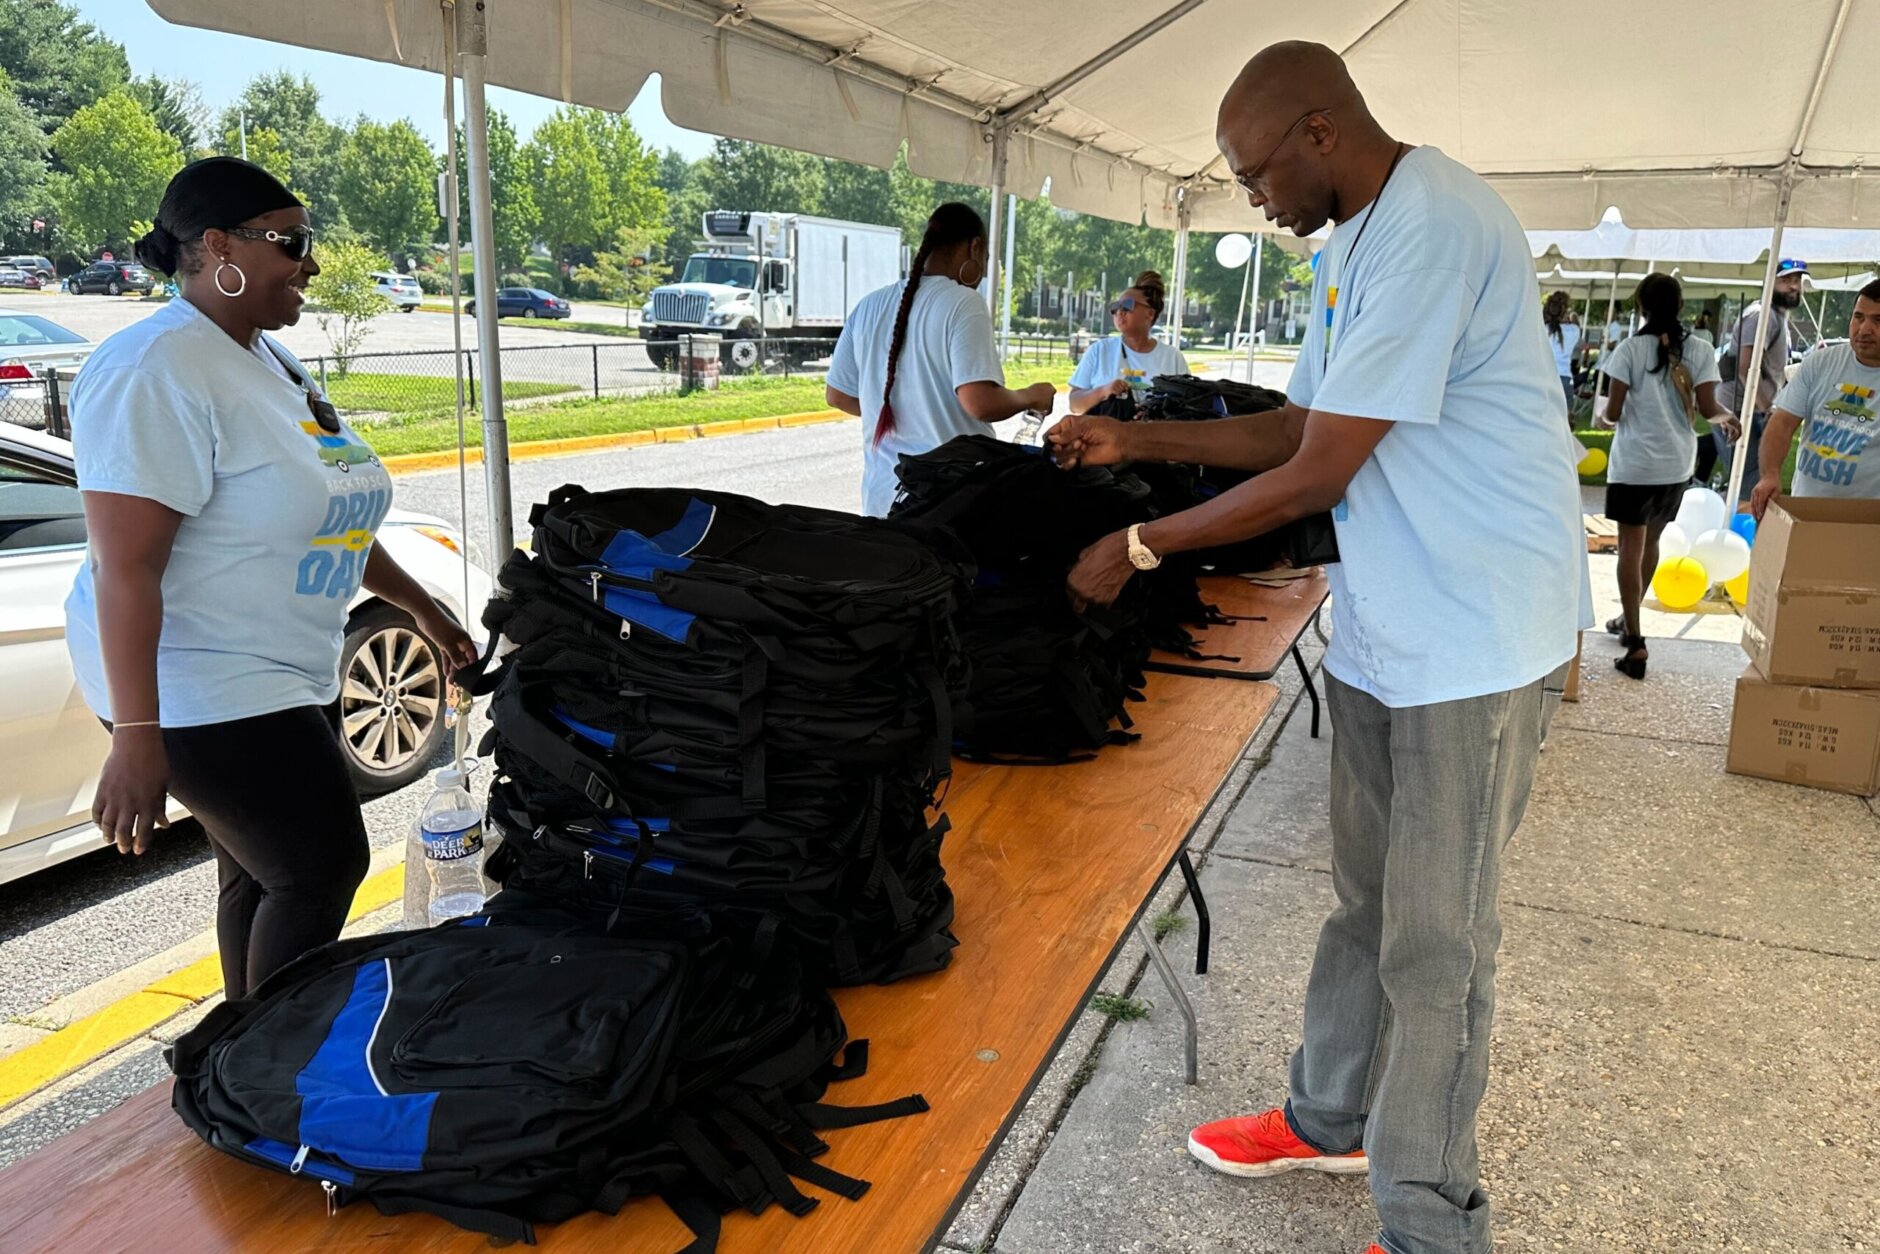 Volunteers organizing backpacks at the Back-To-School Drive and Dash donation event (WTOP/Matt Kaufax)